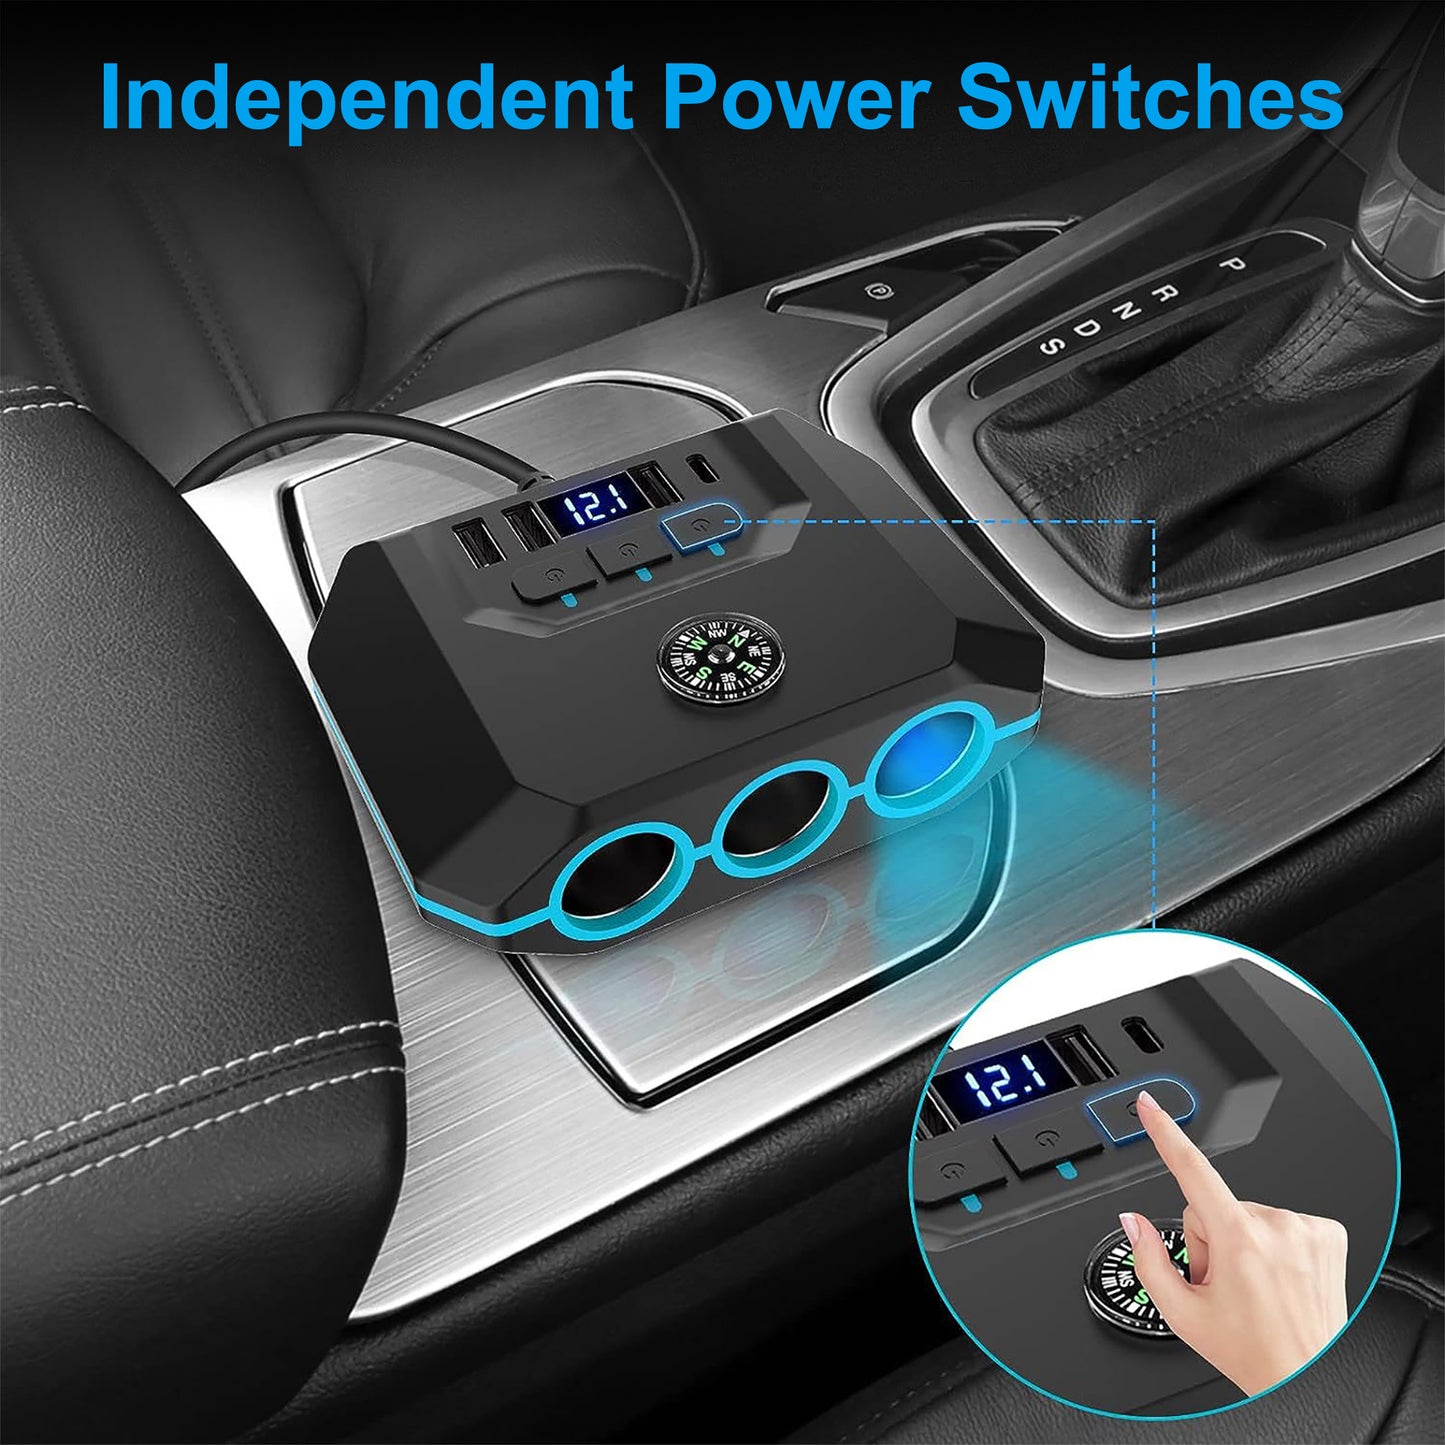 7-in-1 Car Charger Power Adapter - 3 Way Cigarette Lighter Socket Splitter with 4 USB Ports including PD and QC, LED Voltage Display for 12V/24V Vehicles